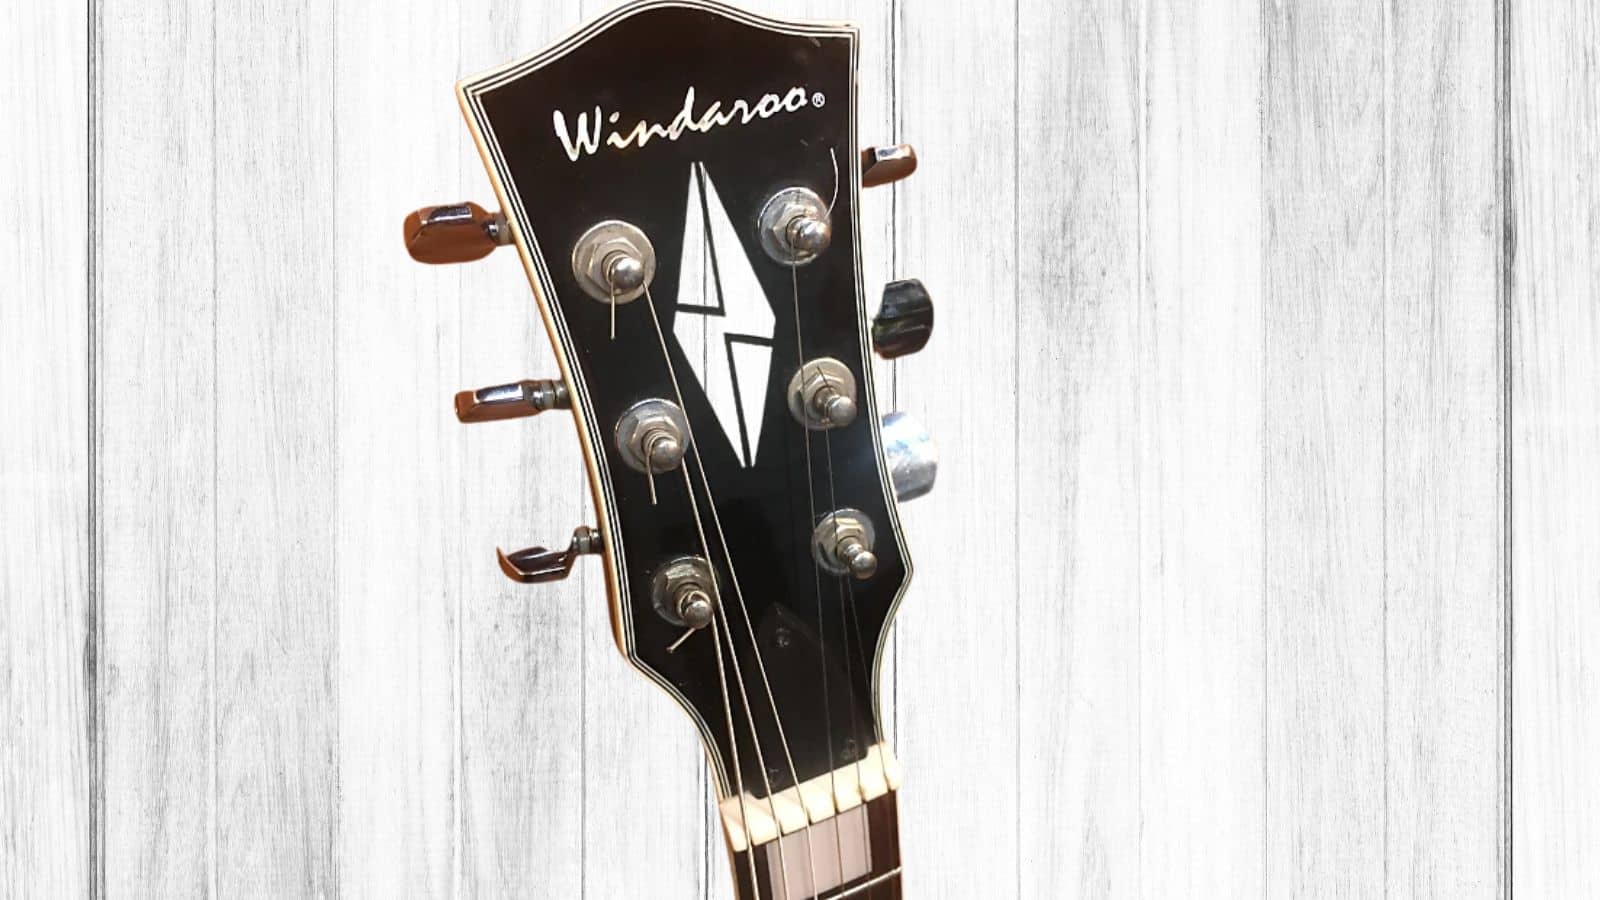 All About Windaroo Guitars